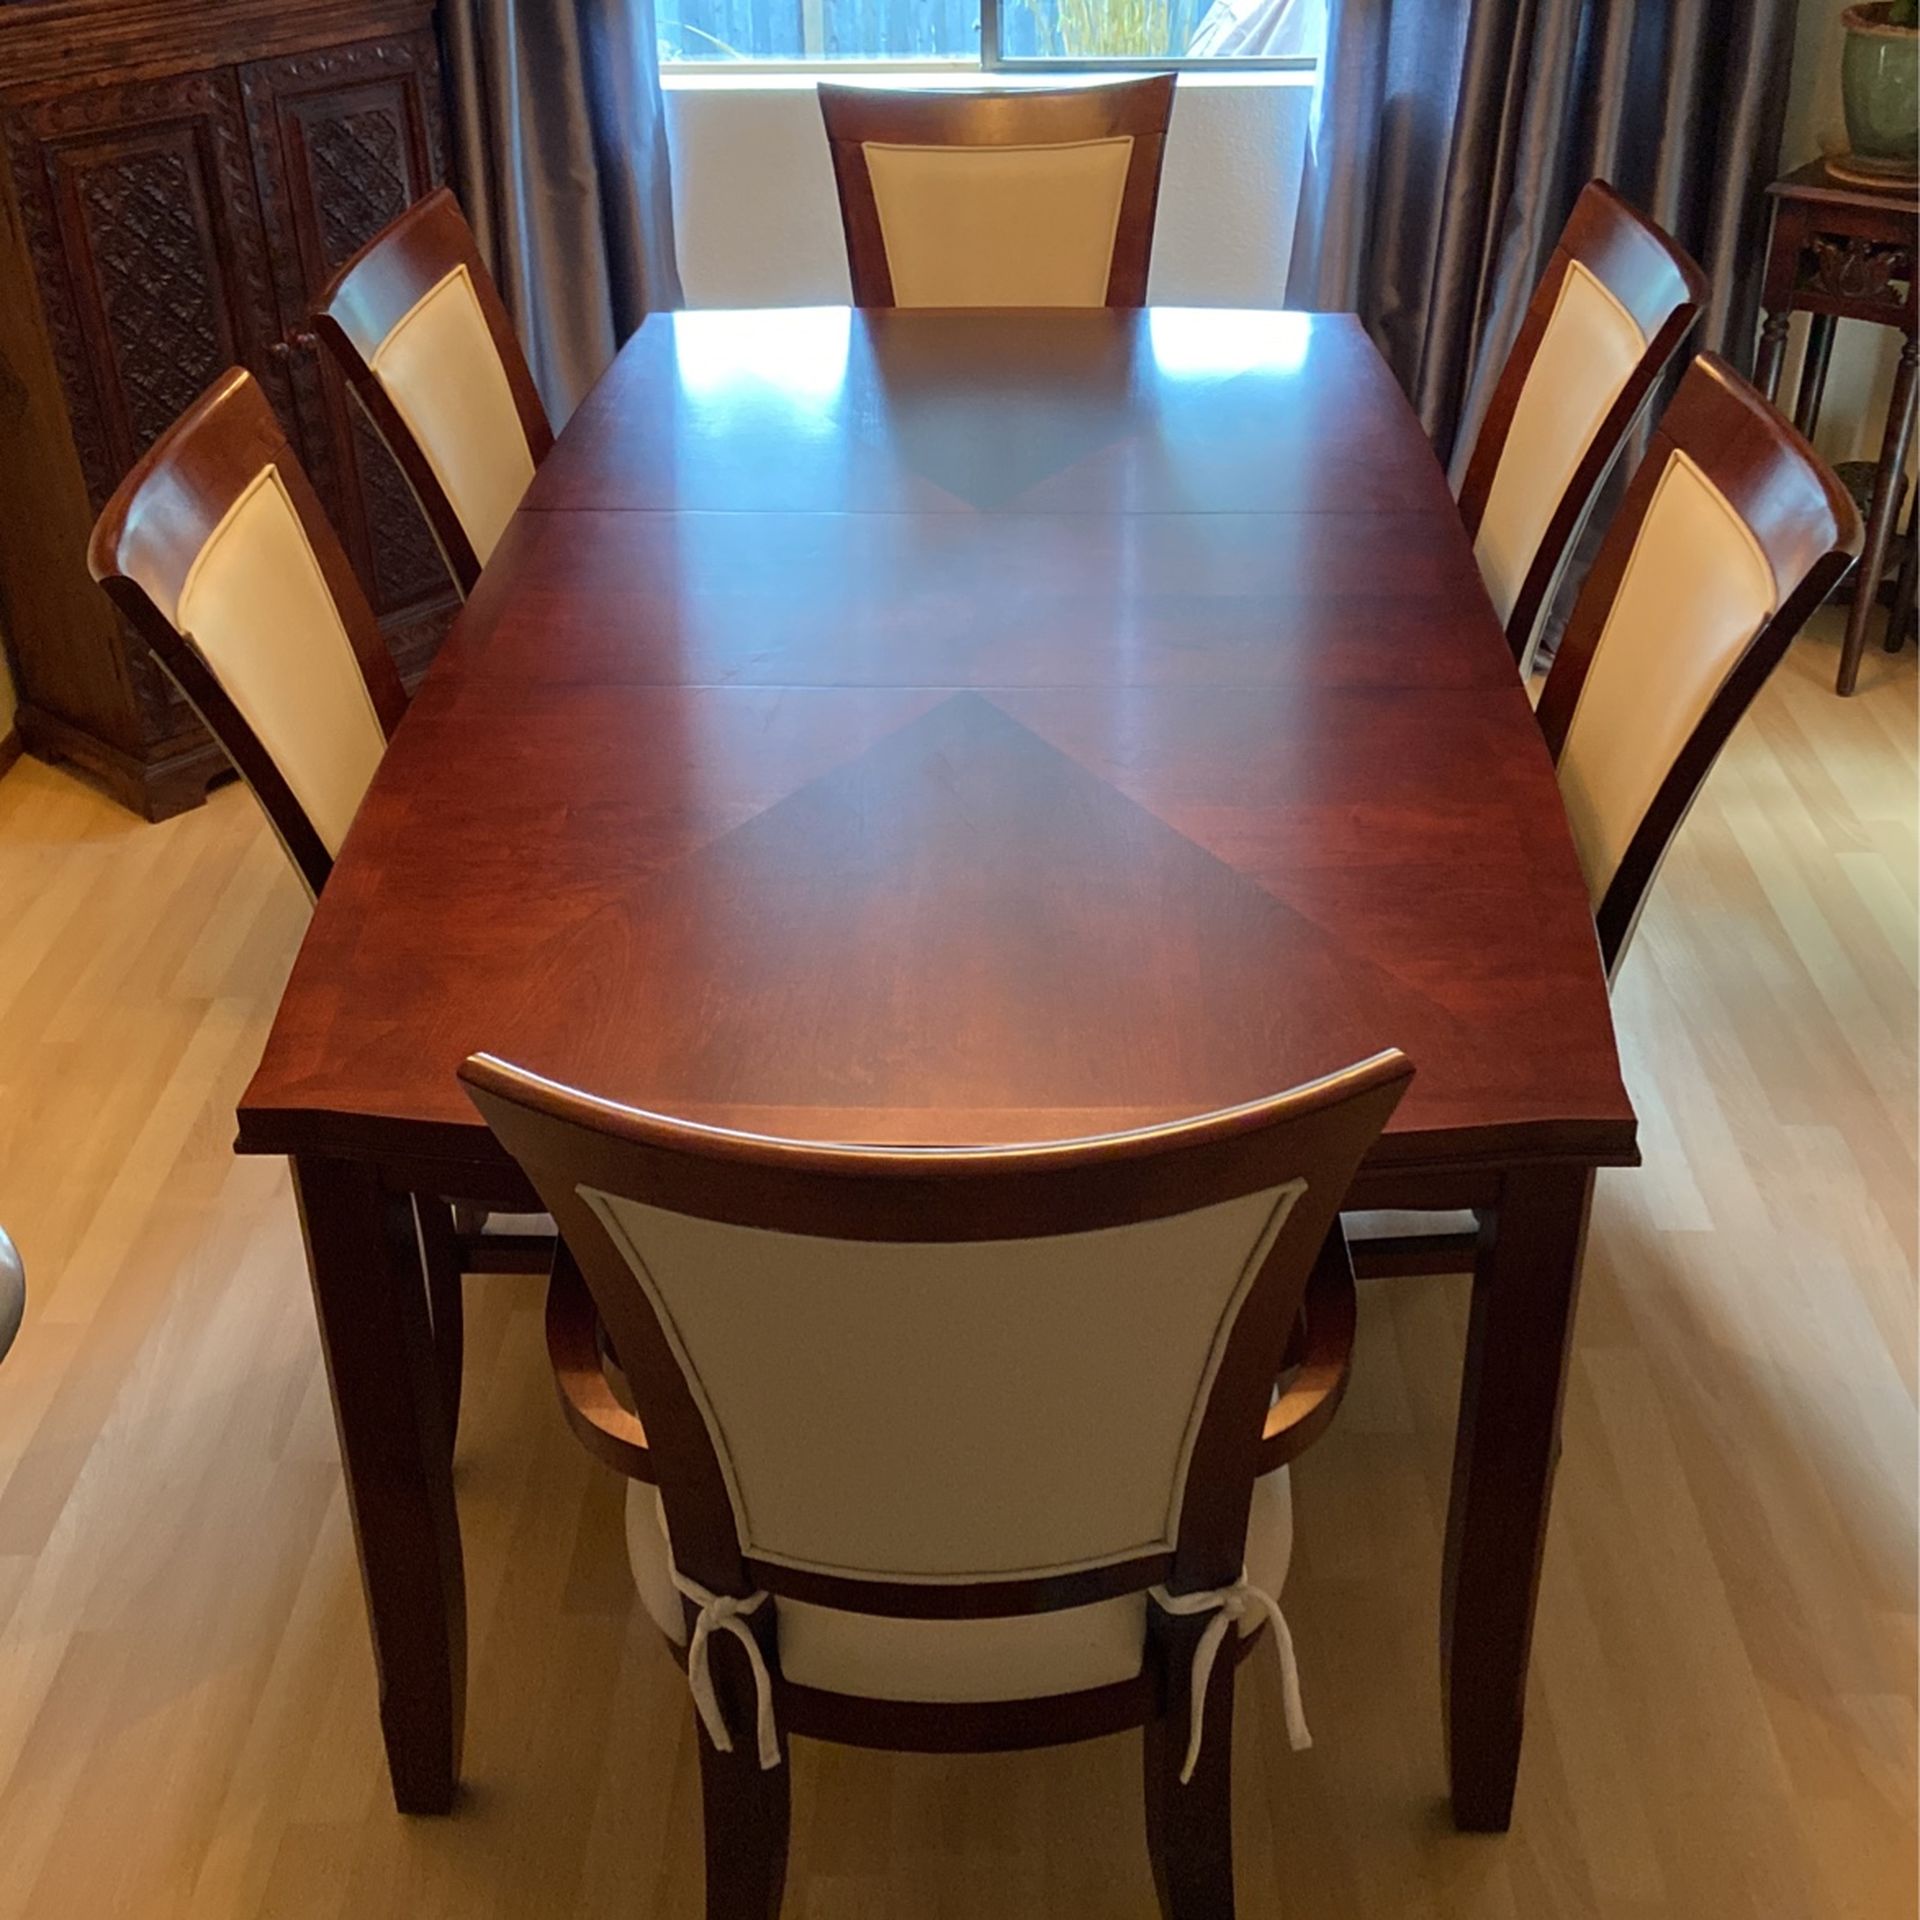 Dining room table made by Casana Furniture company